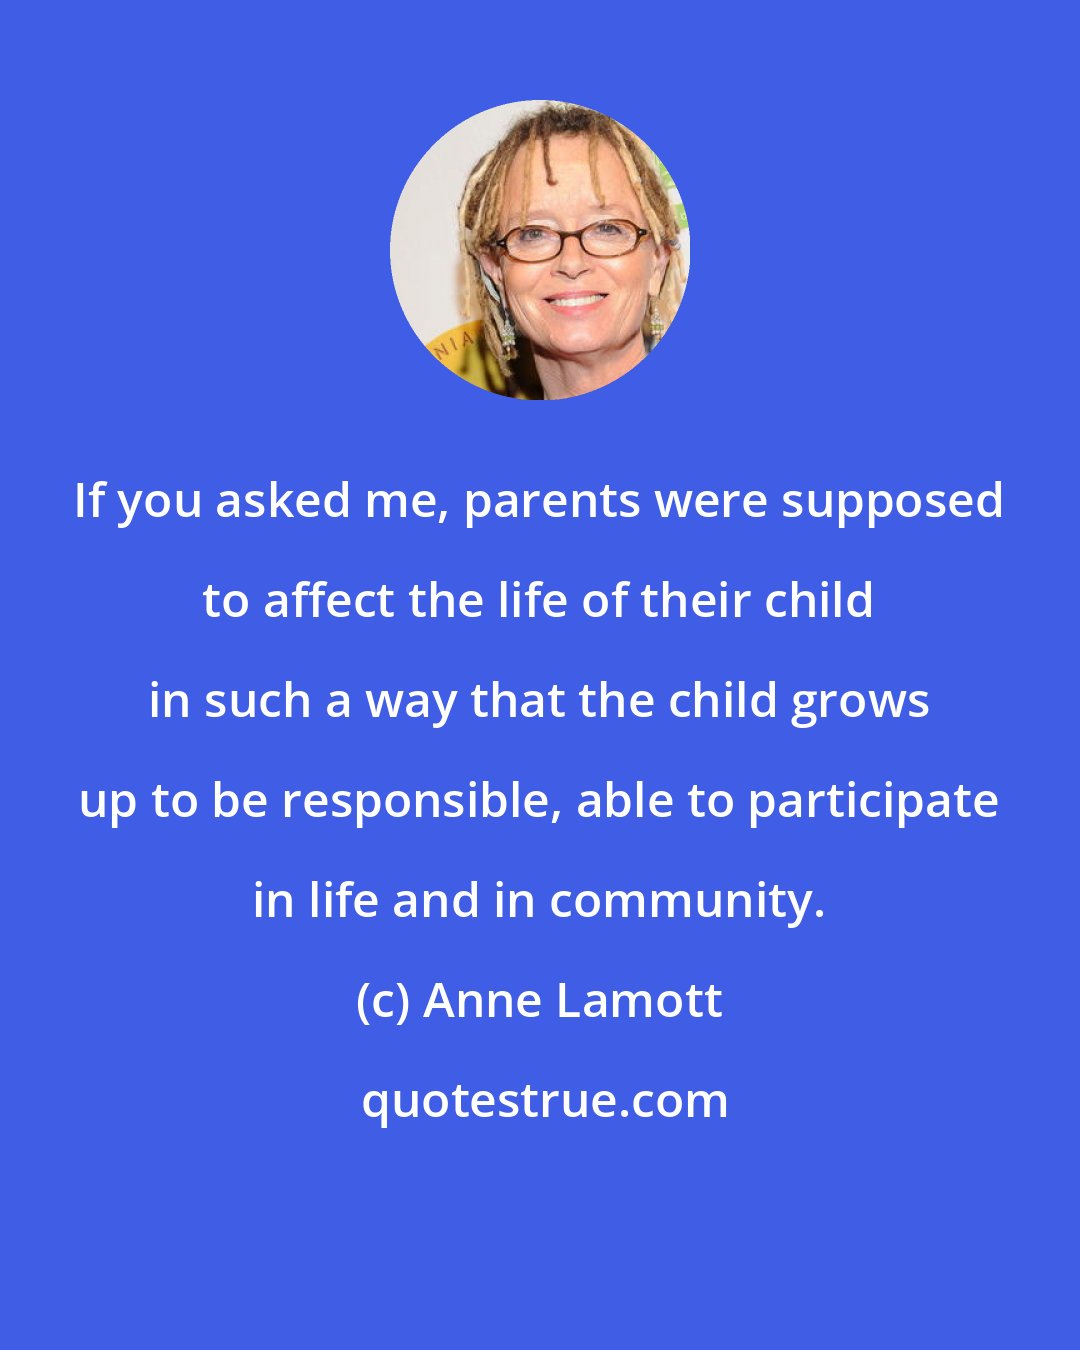 Anne Lamott: If you asked me, parents were supposed to affect the life of their child in such a way that the child grows up to be responsible, able to participate in life and in community.